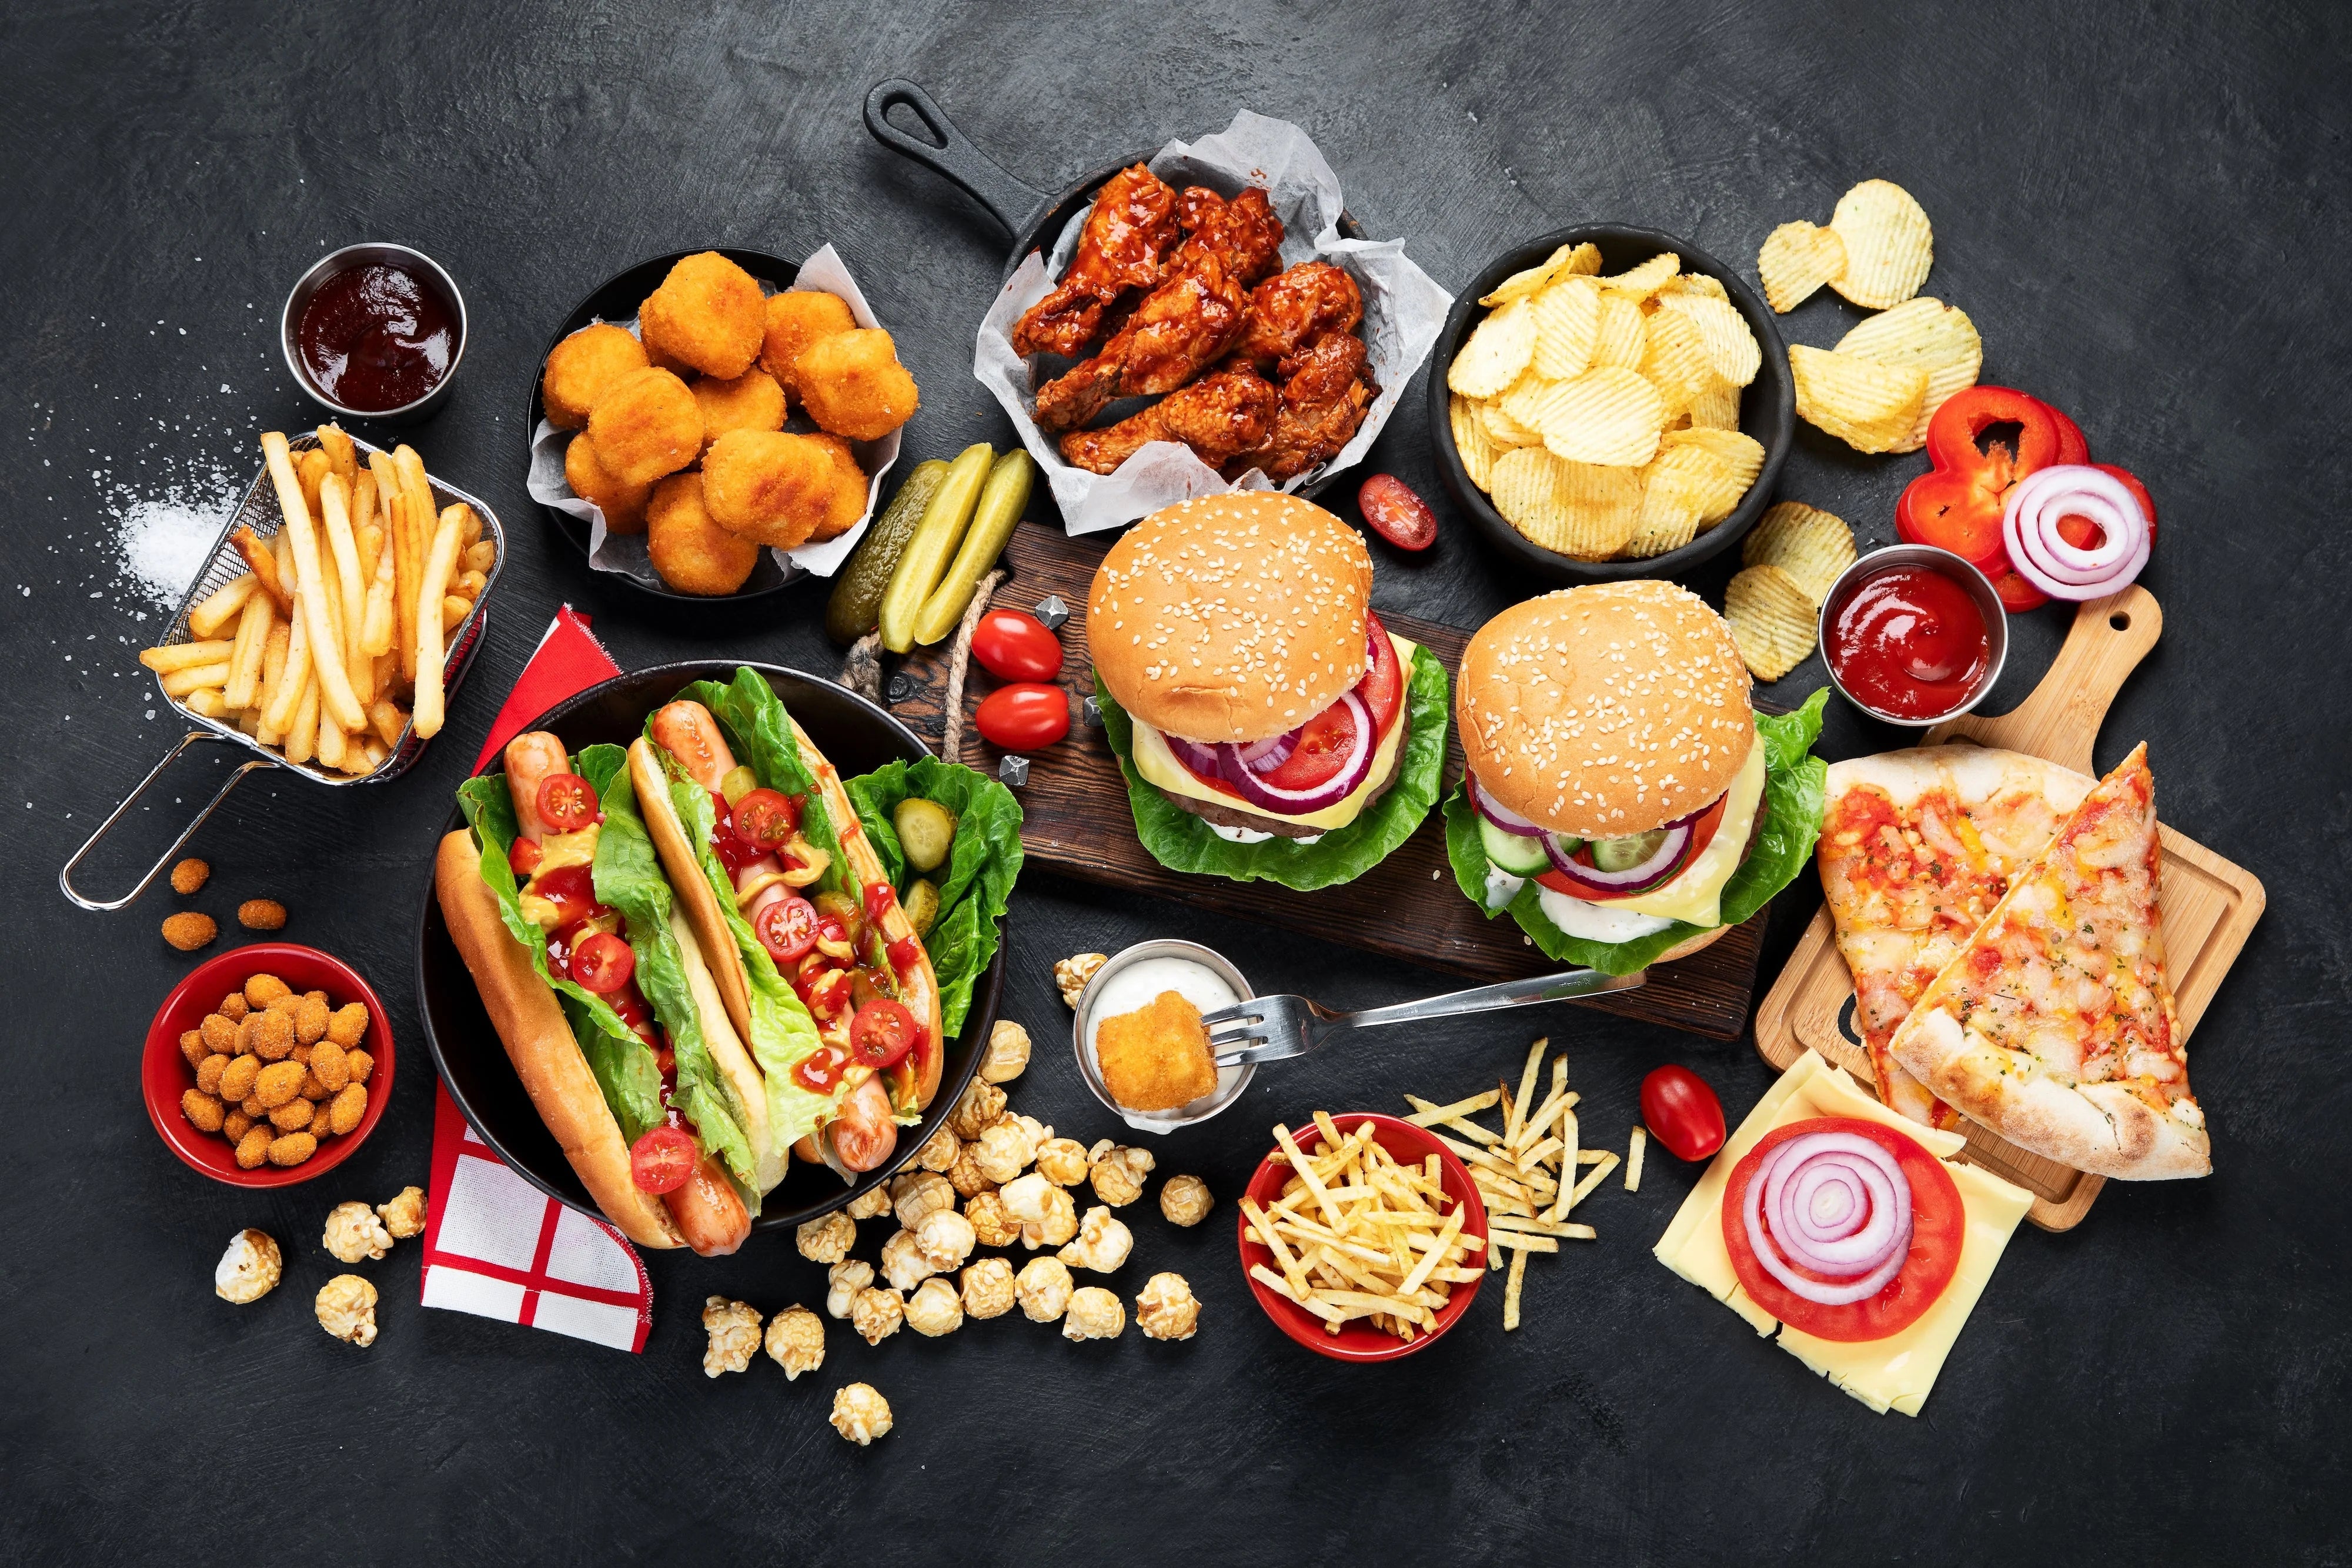 Study: Highly processed foods have addictive properties